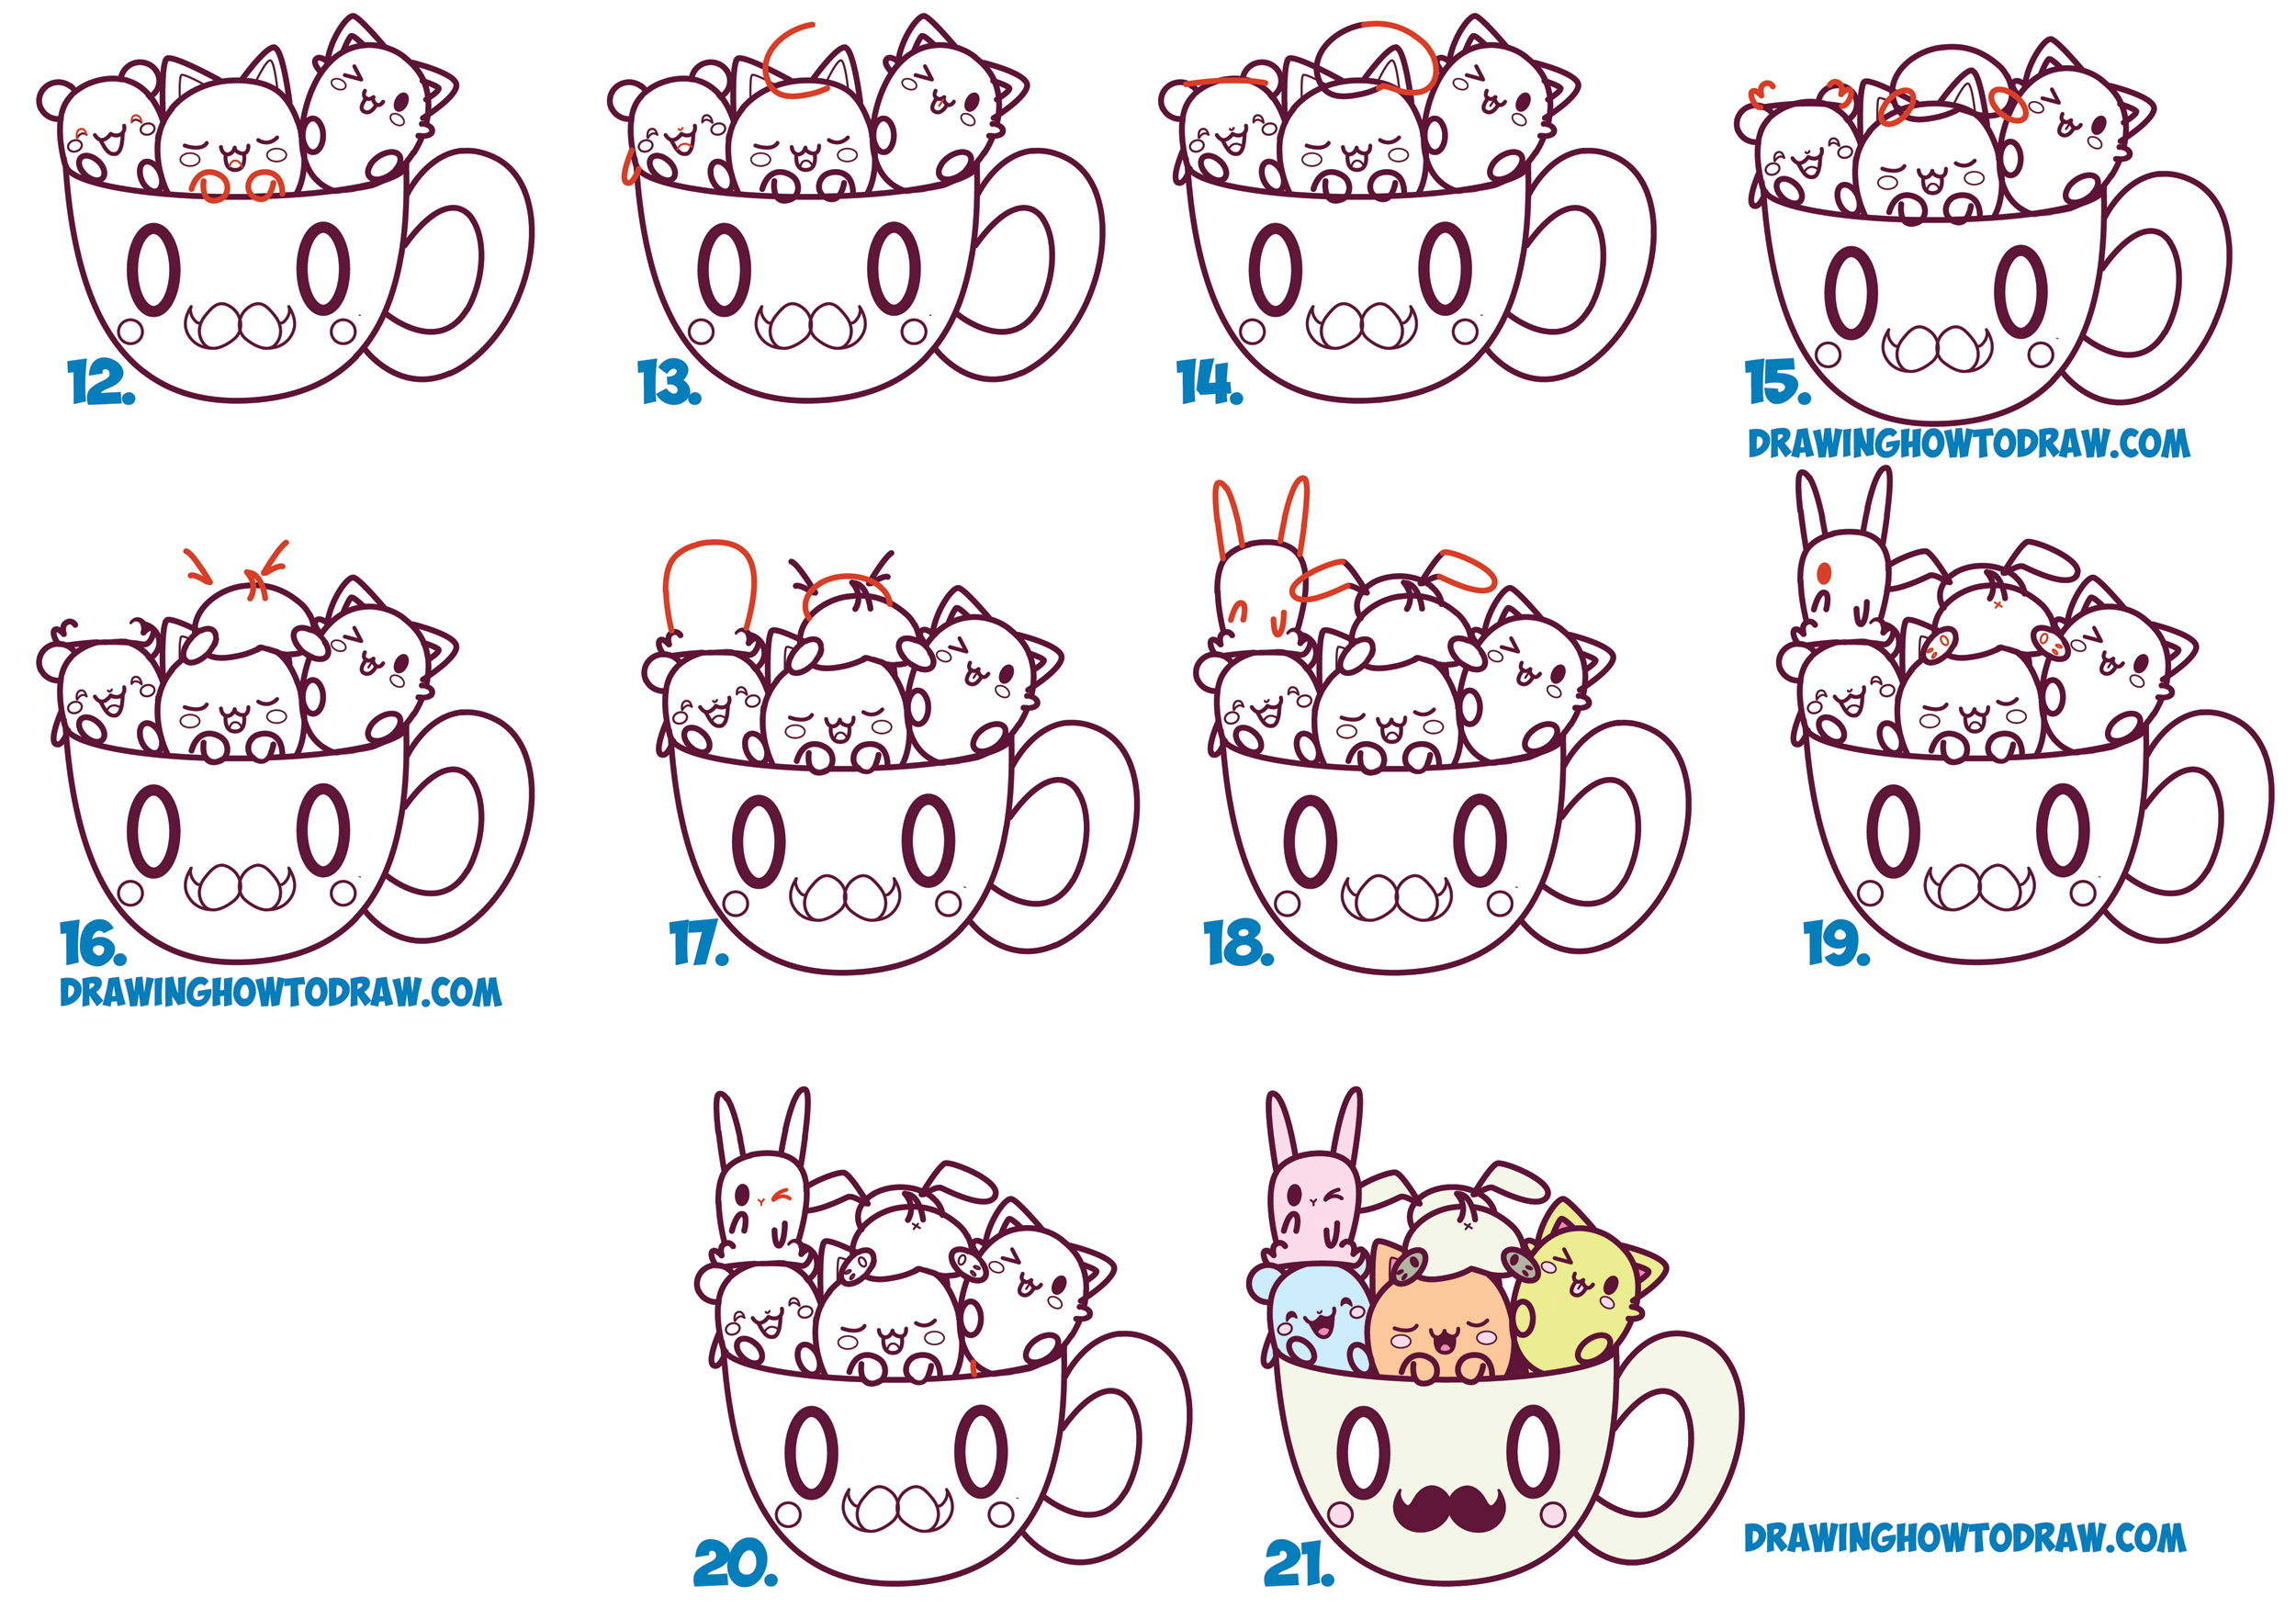 HOW TO DRAW CUP FOR KIDS, CUP DRAWING FOR KIDS, EASY